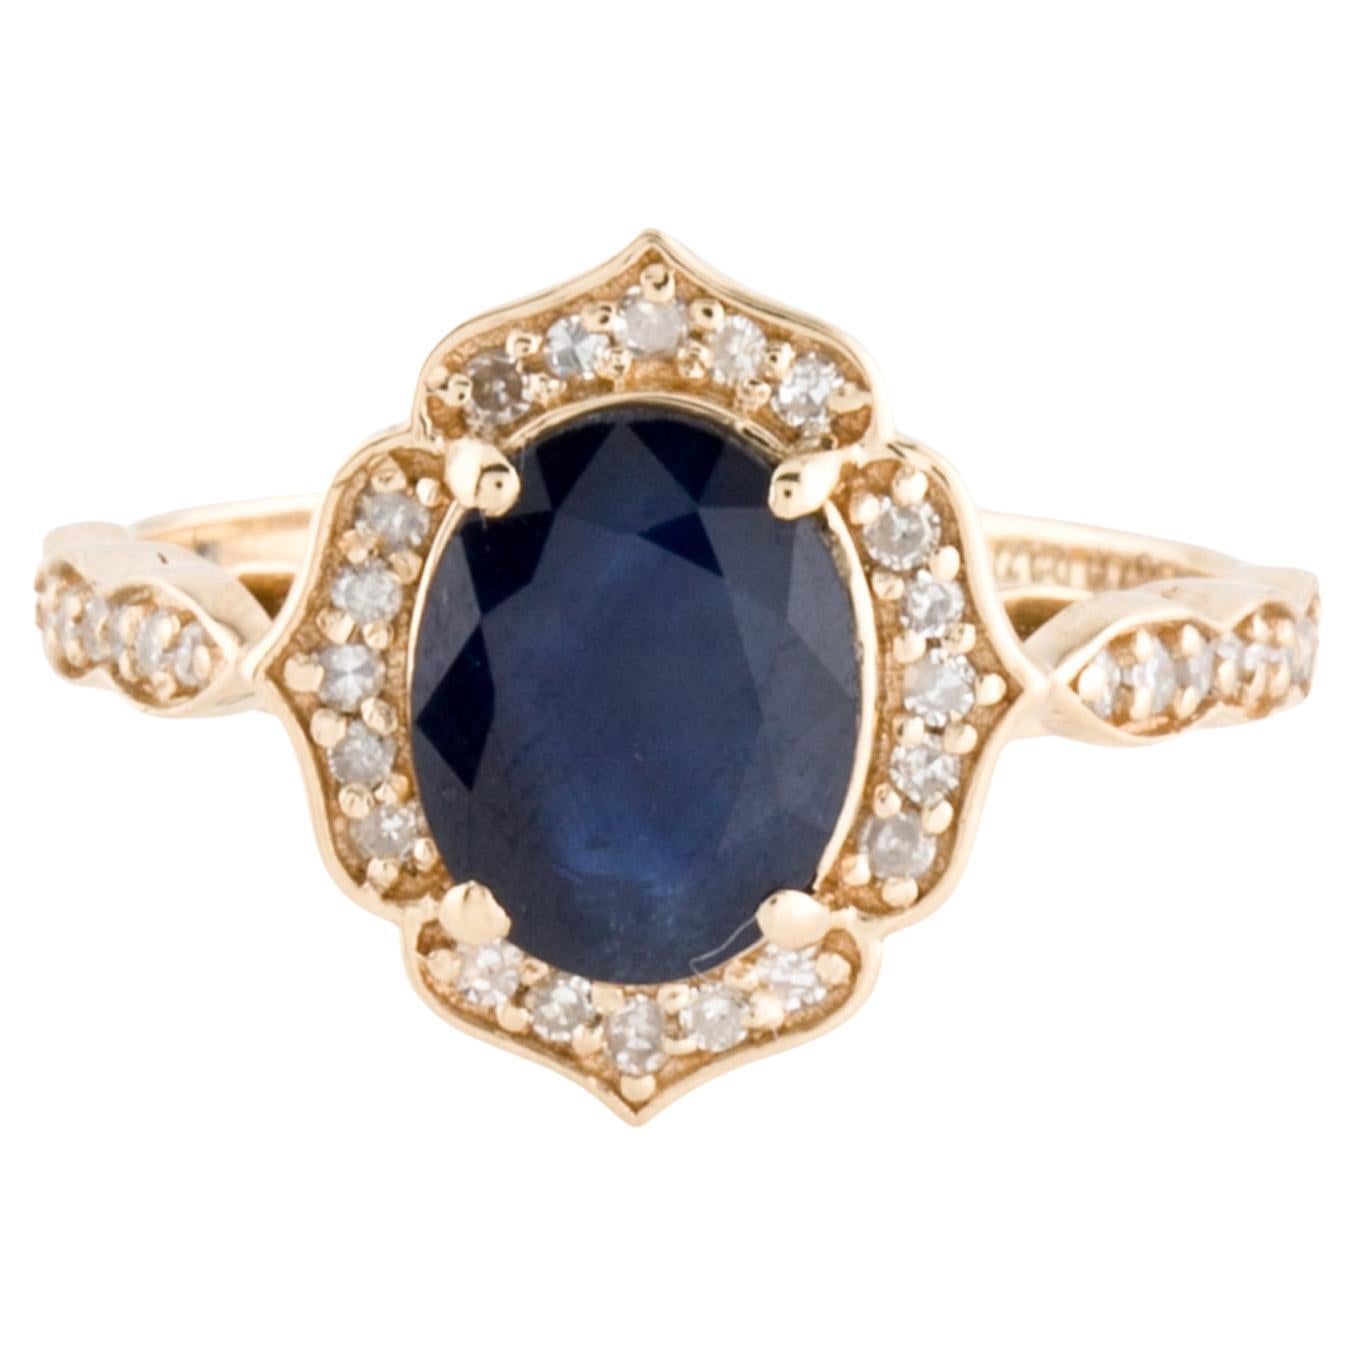 Luxurious 14K Gold Sapphire & Diamond Cocktail Ring Size 6.75 Statement Jewelry For Sale